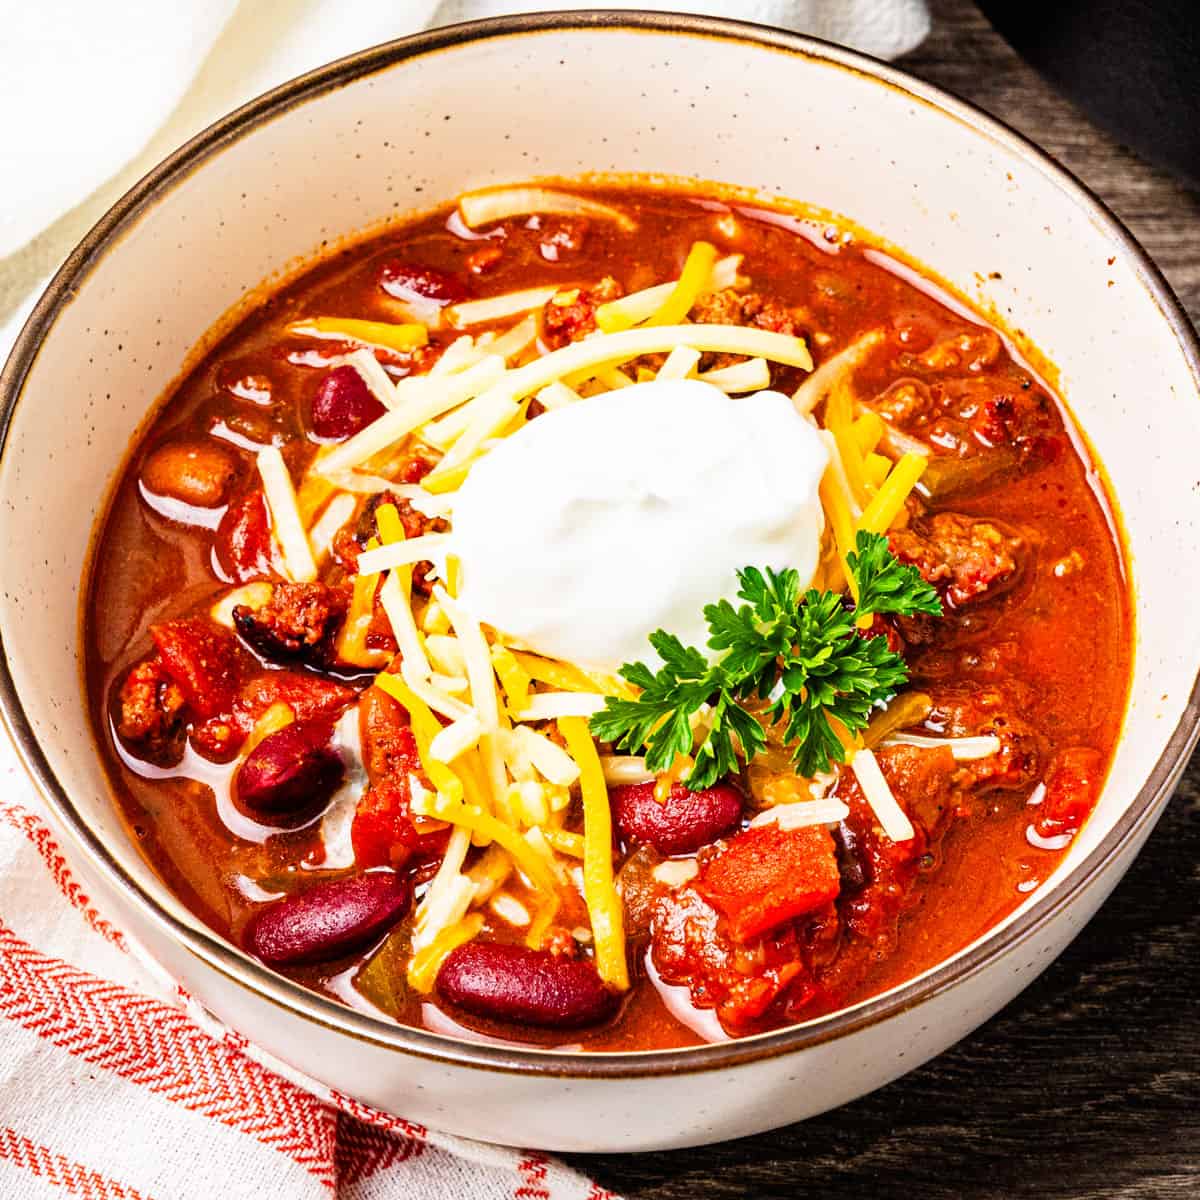 A bowl of smoked chili served with shredded cheese and sour cream.